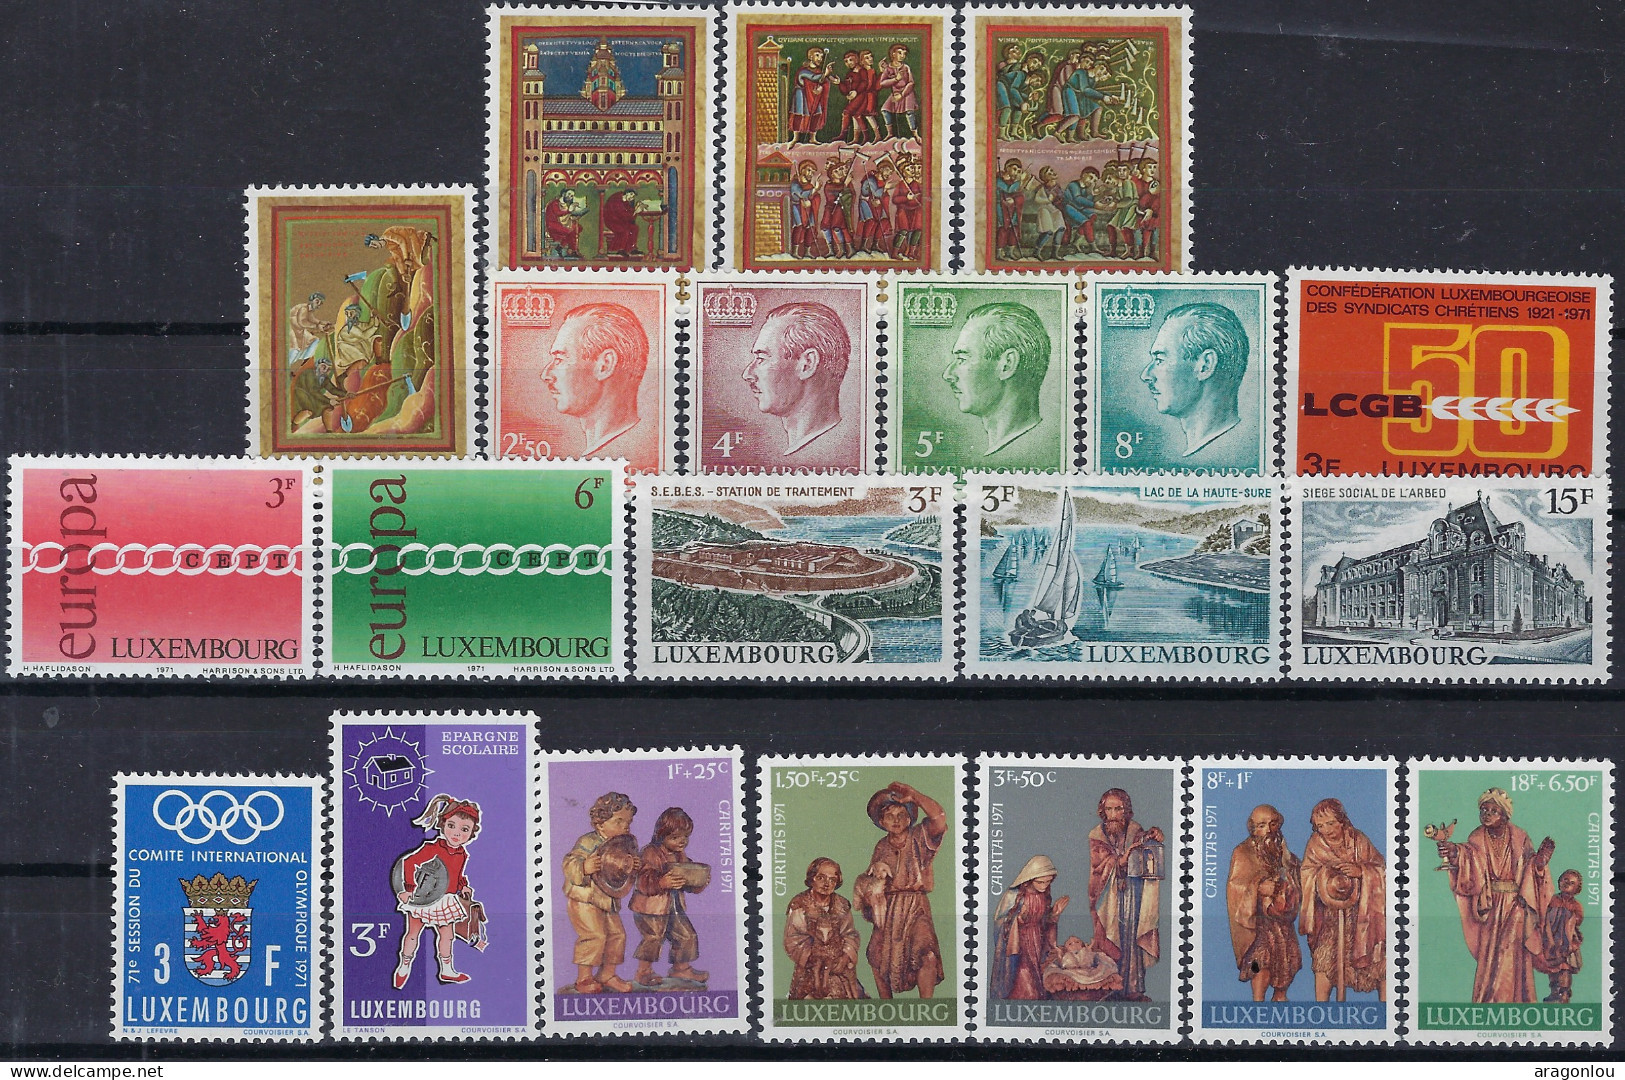 Luxembourg - Luxemburg -   Année Complète  8 Séries   MNH**  1971   MNH** - Años Completos